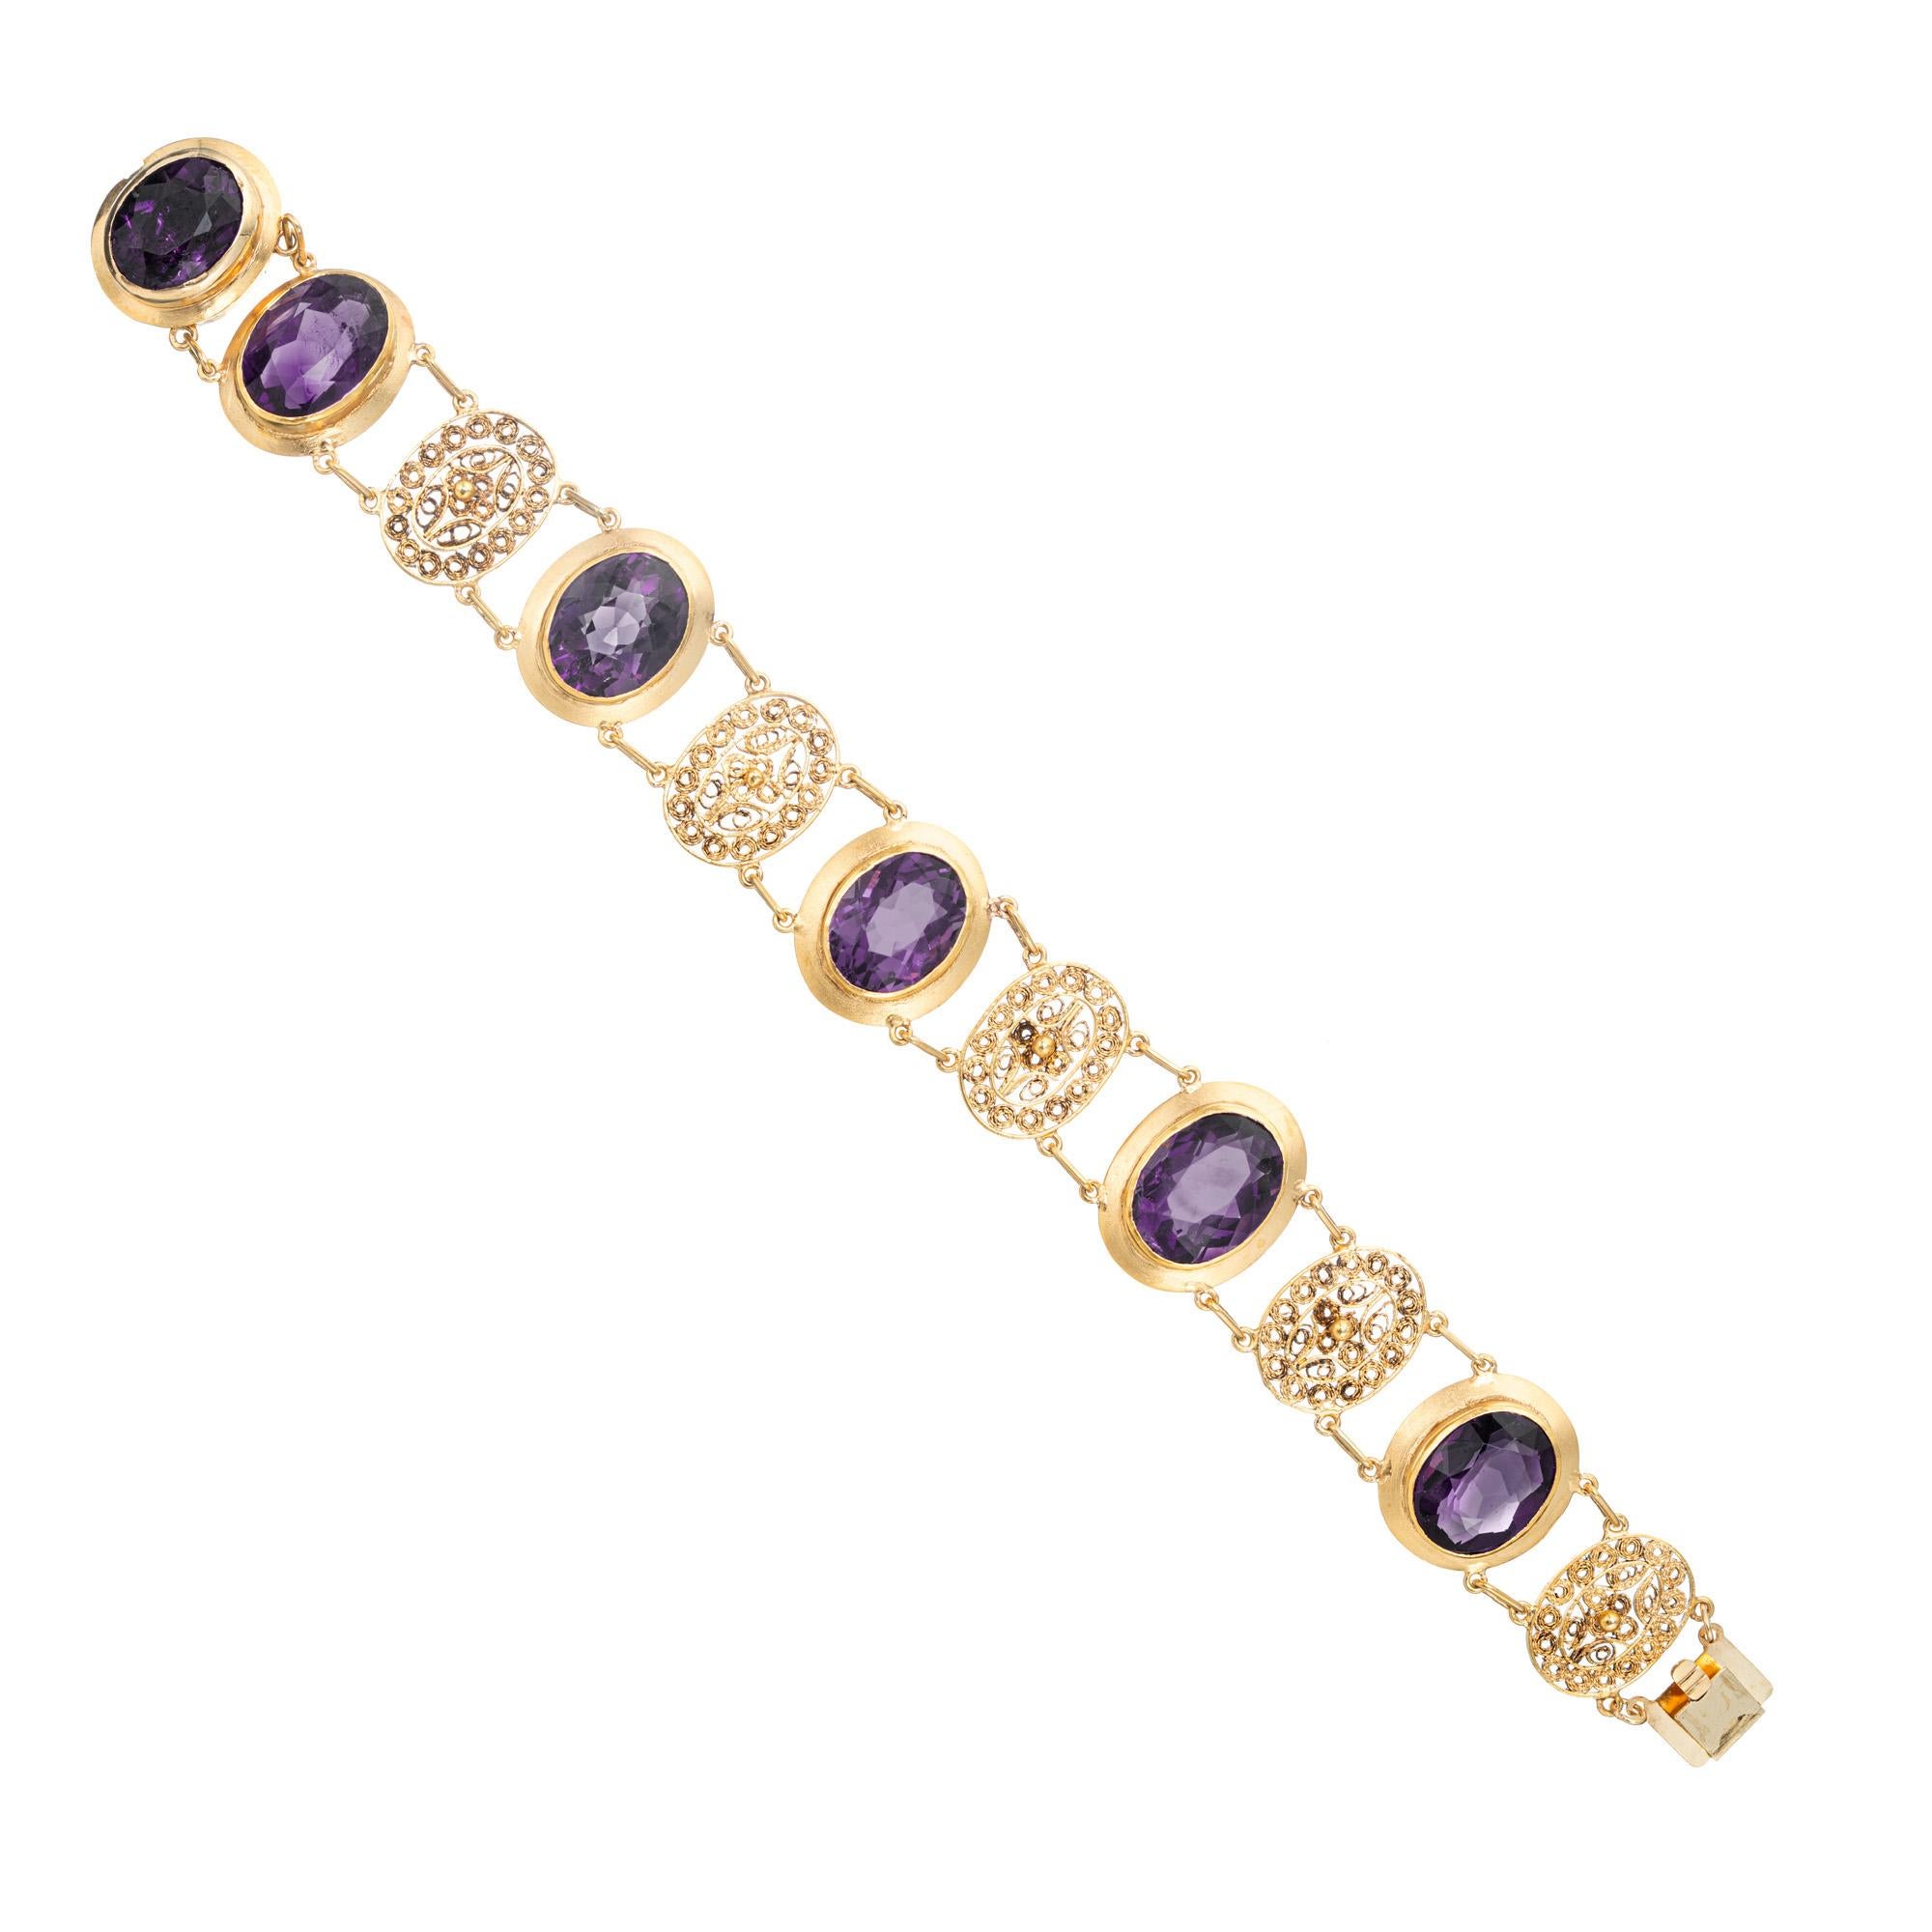 1970's Amethyst Filigree bracelet. 6 large warm oval amethyst bezel set amethysts totaling 27.00cts, set in 14k yellow gold with oval beautifully detailed filigree separators. A unique statement piece. 6.5 inches.  

6 genuine fine bright purple